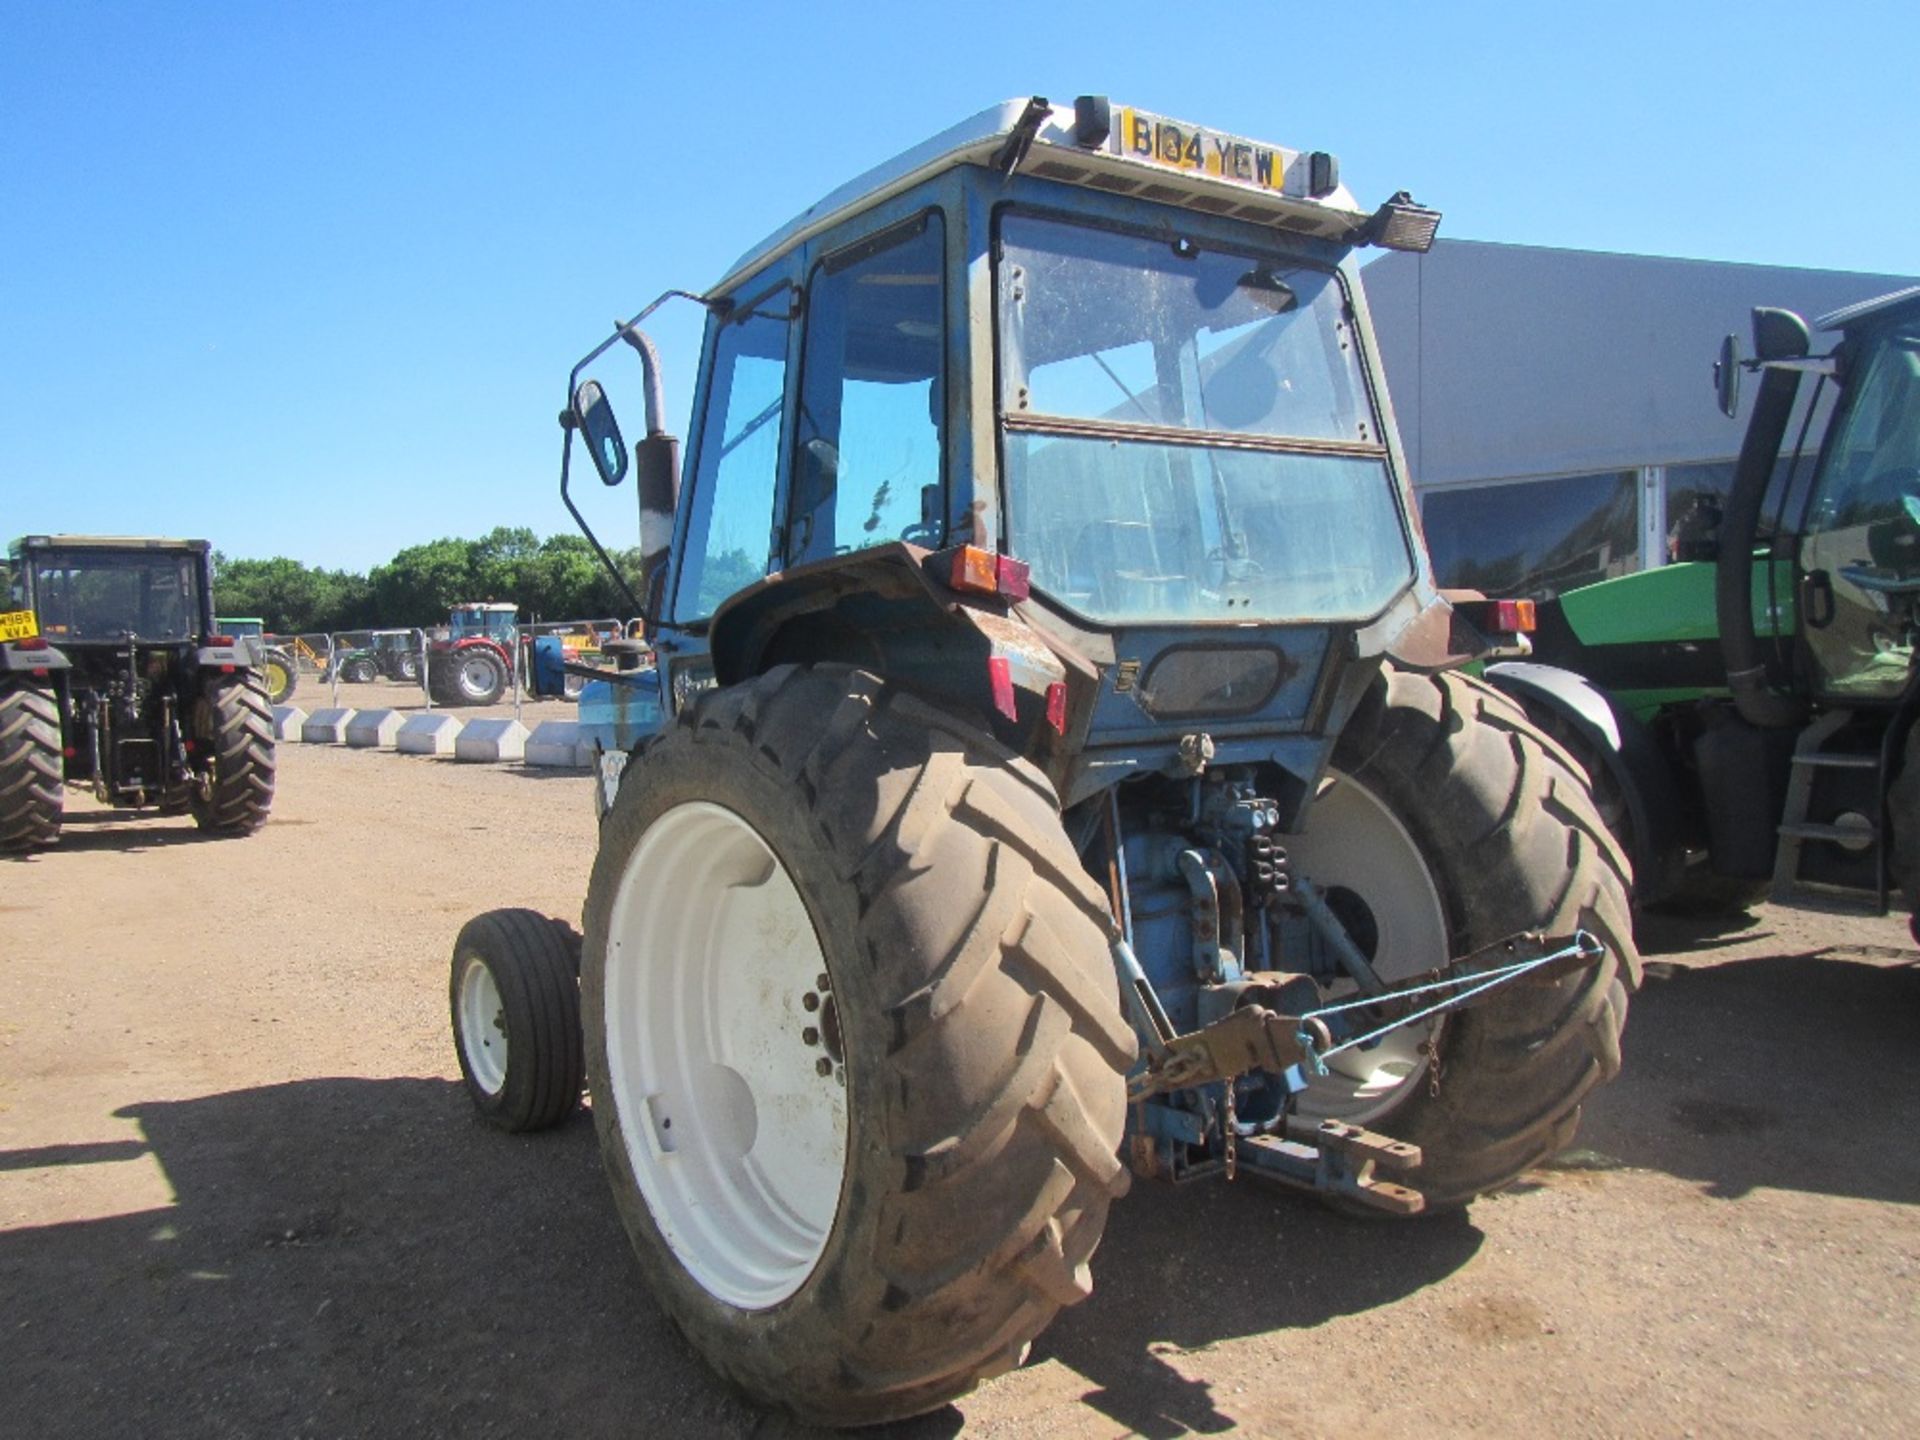 Ford 6610 2wd Tractor c/w V5. 2 owners Reg. No. B134 YEW Hours: 5,282 - Image 6 of 10